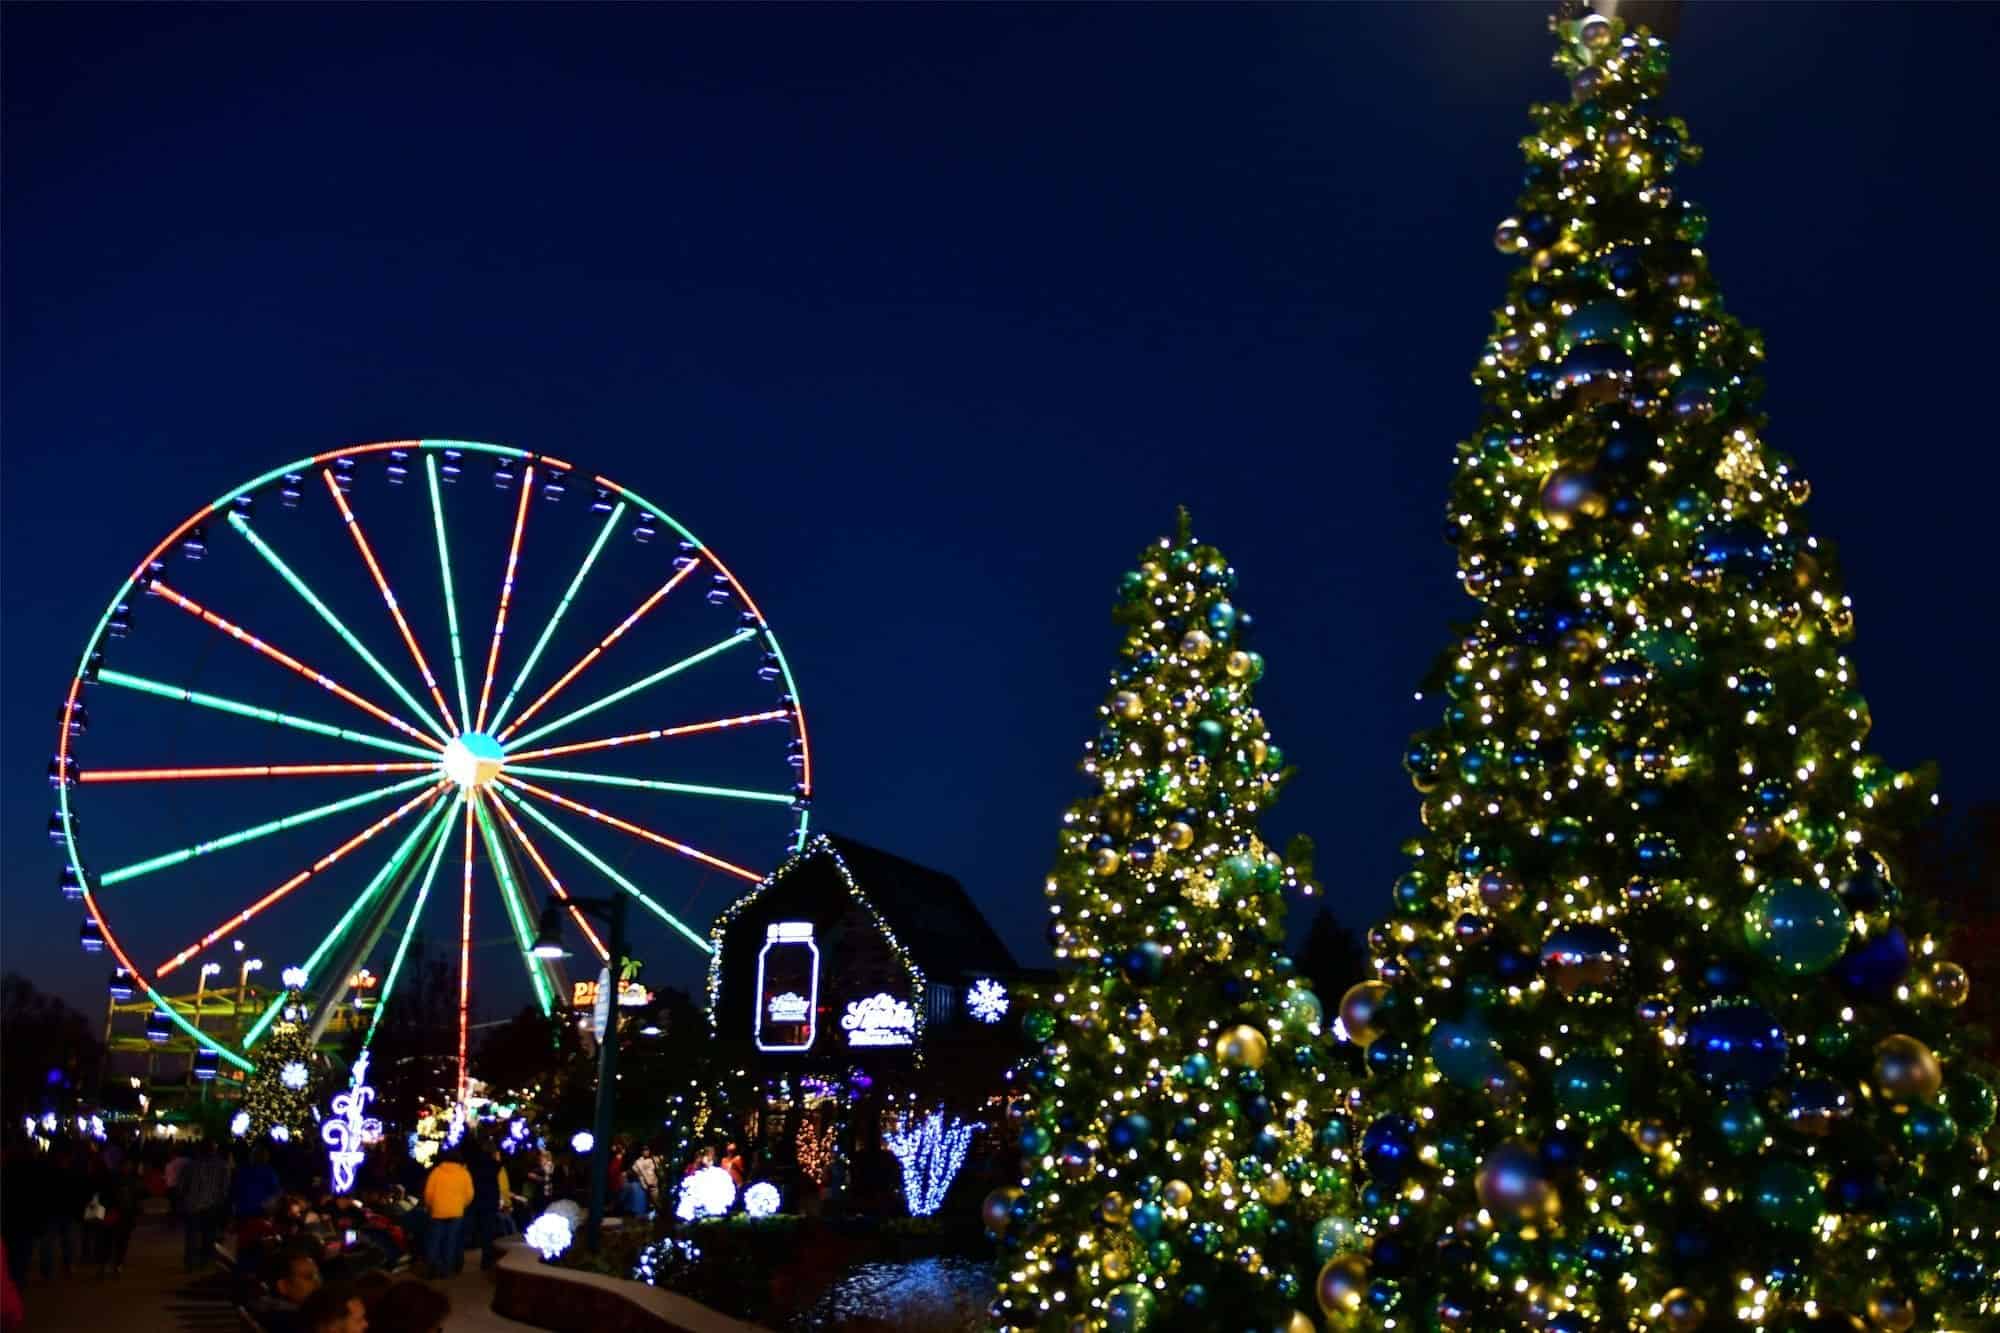 Top 3 Reasons to Visit The Island in Pigeon Forge During the Holiday Season